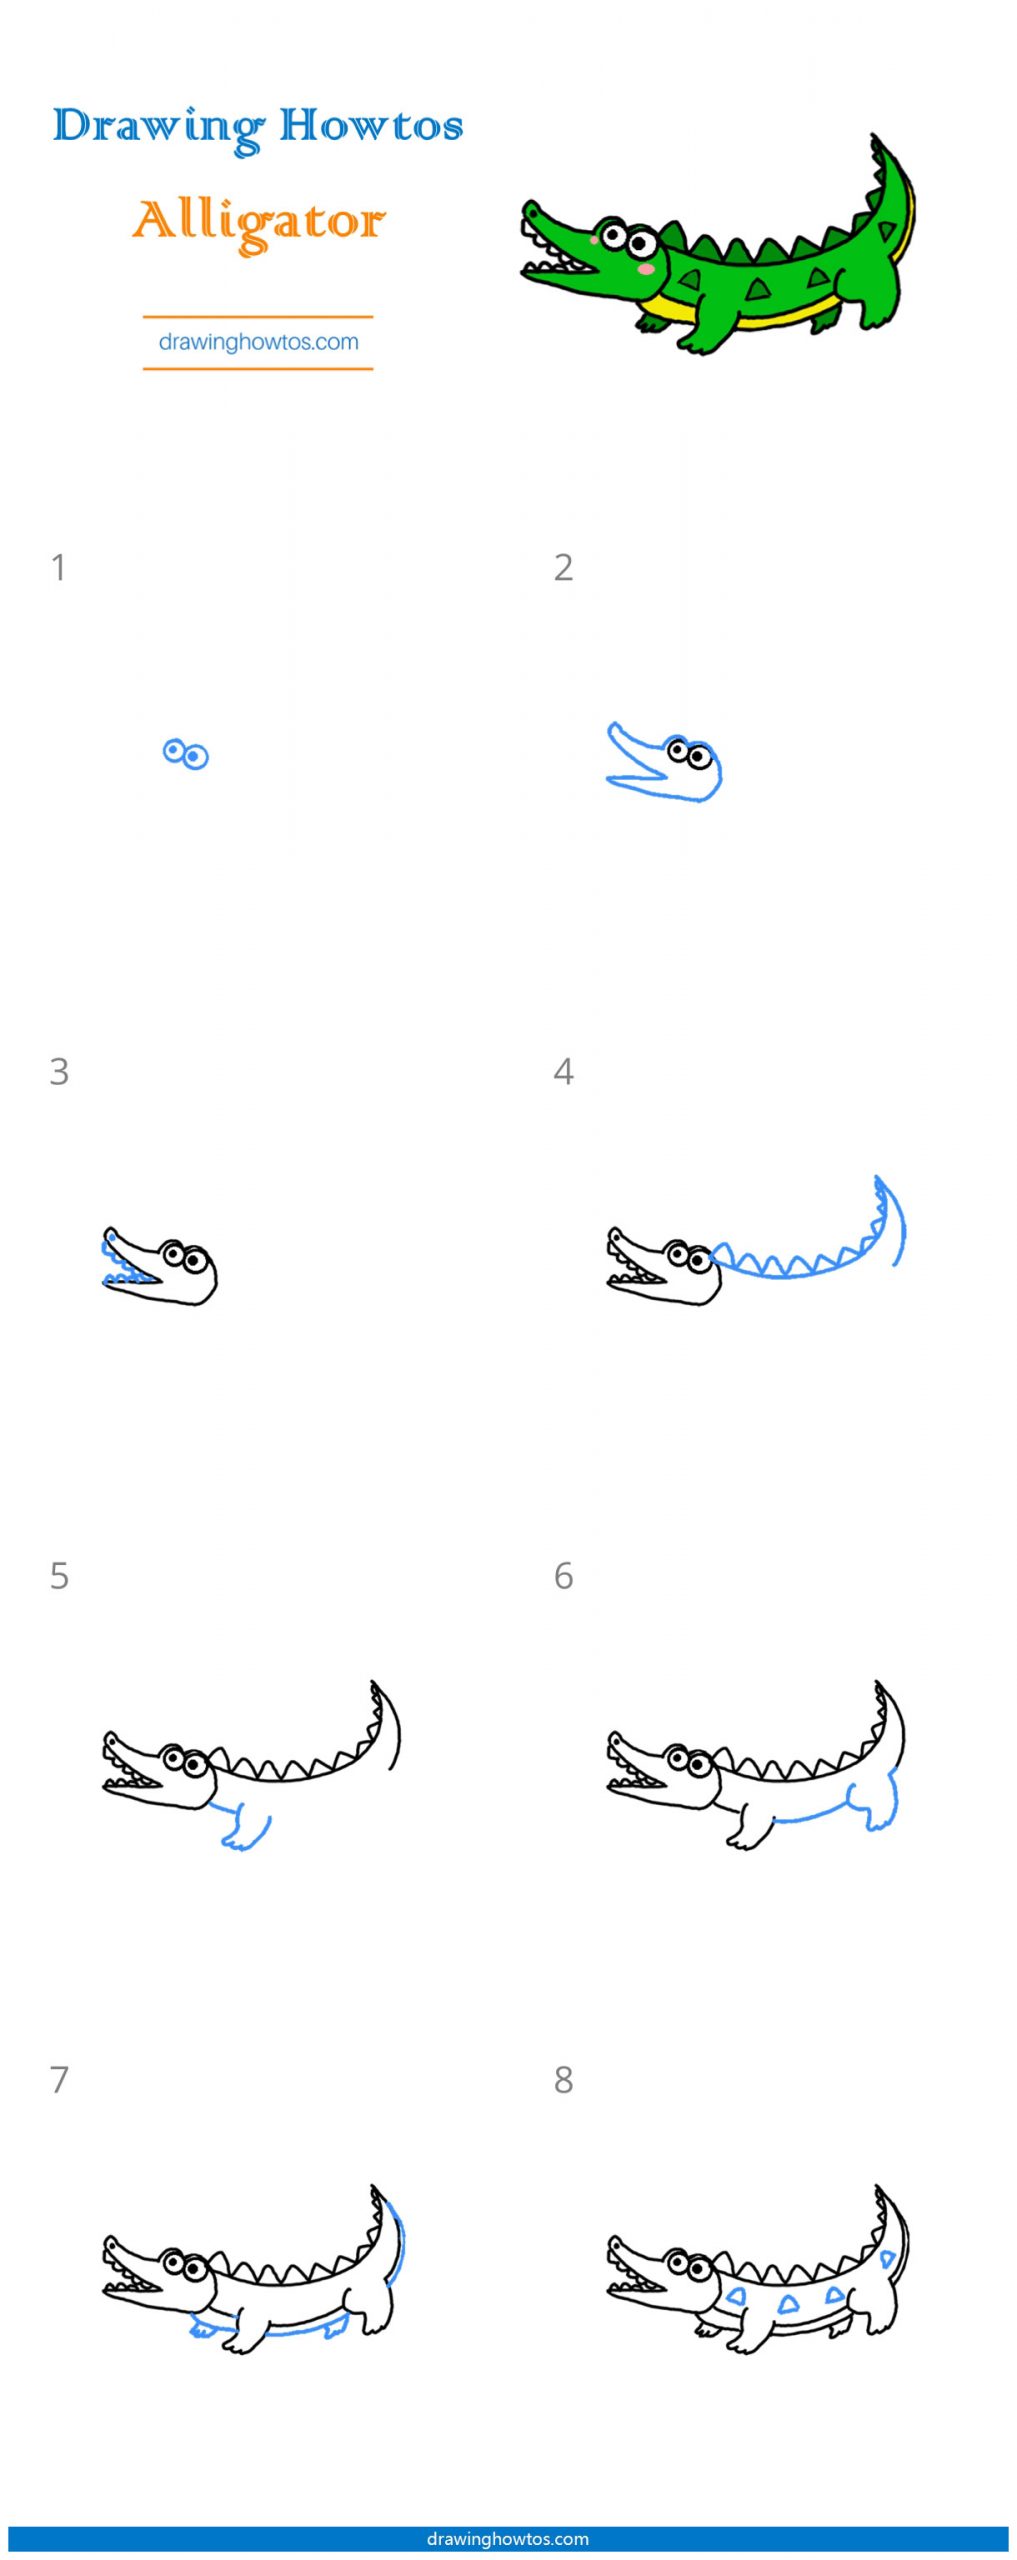 How to Draw an Alligator Step by Step